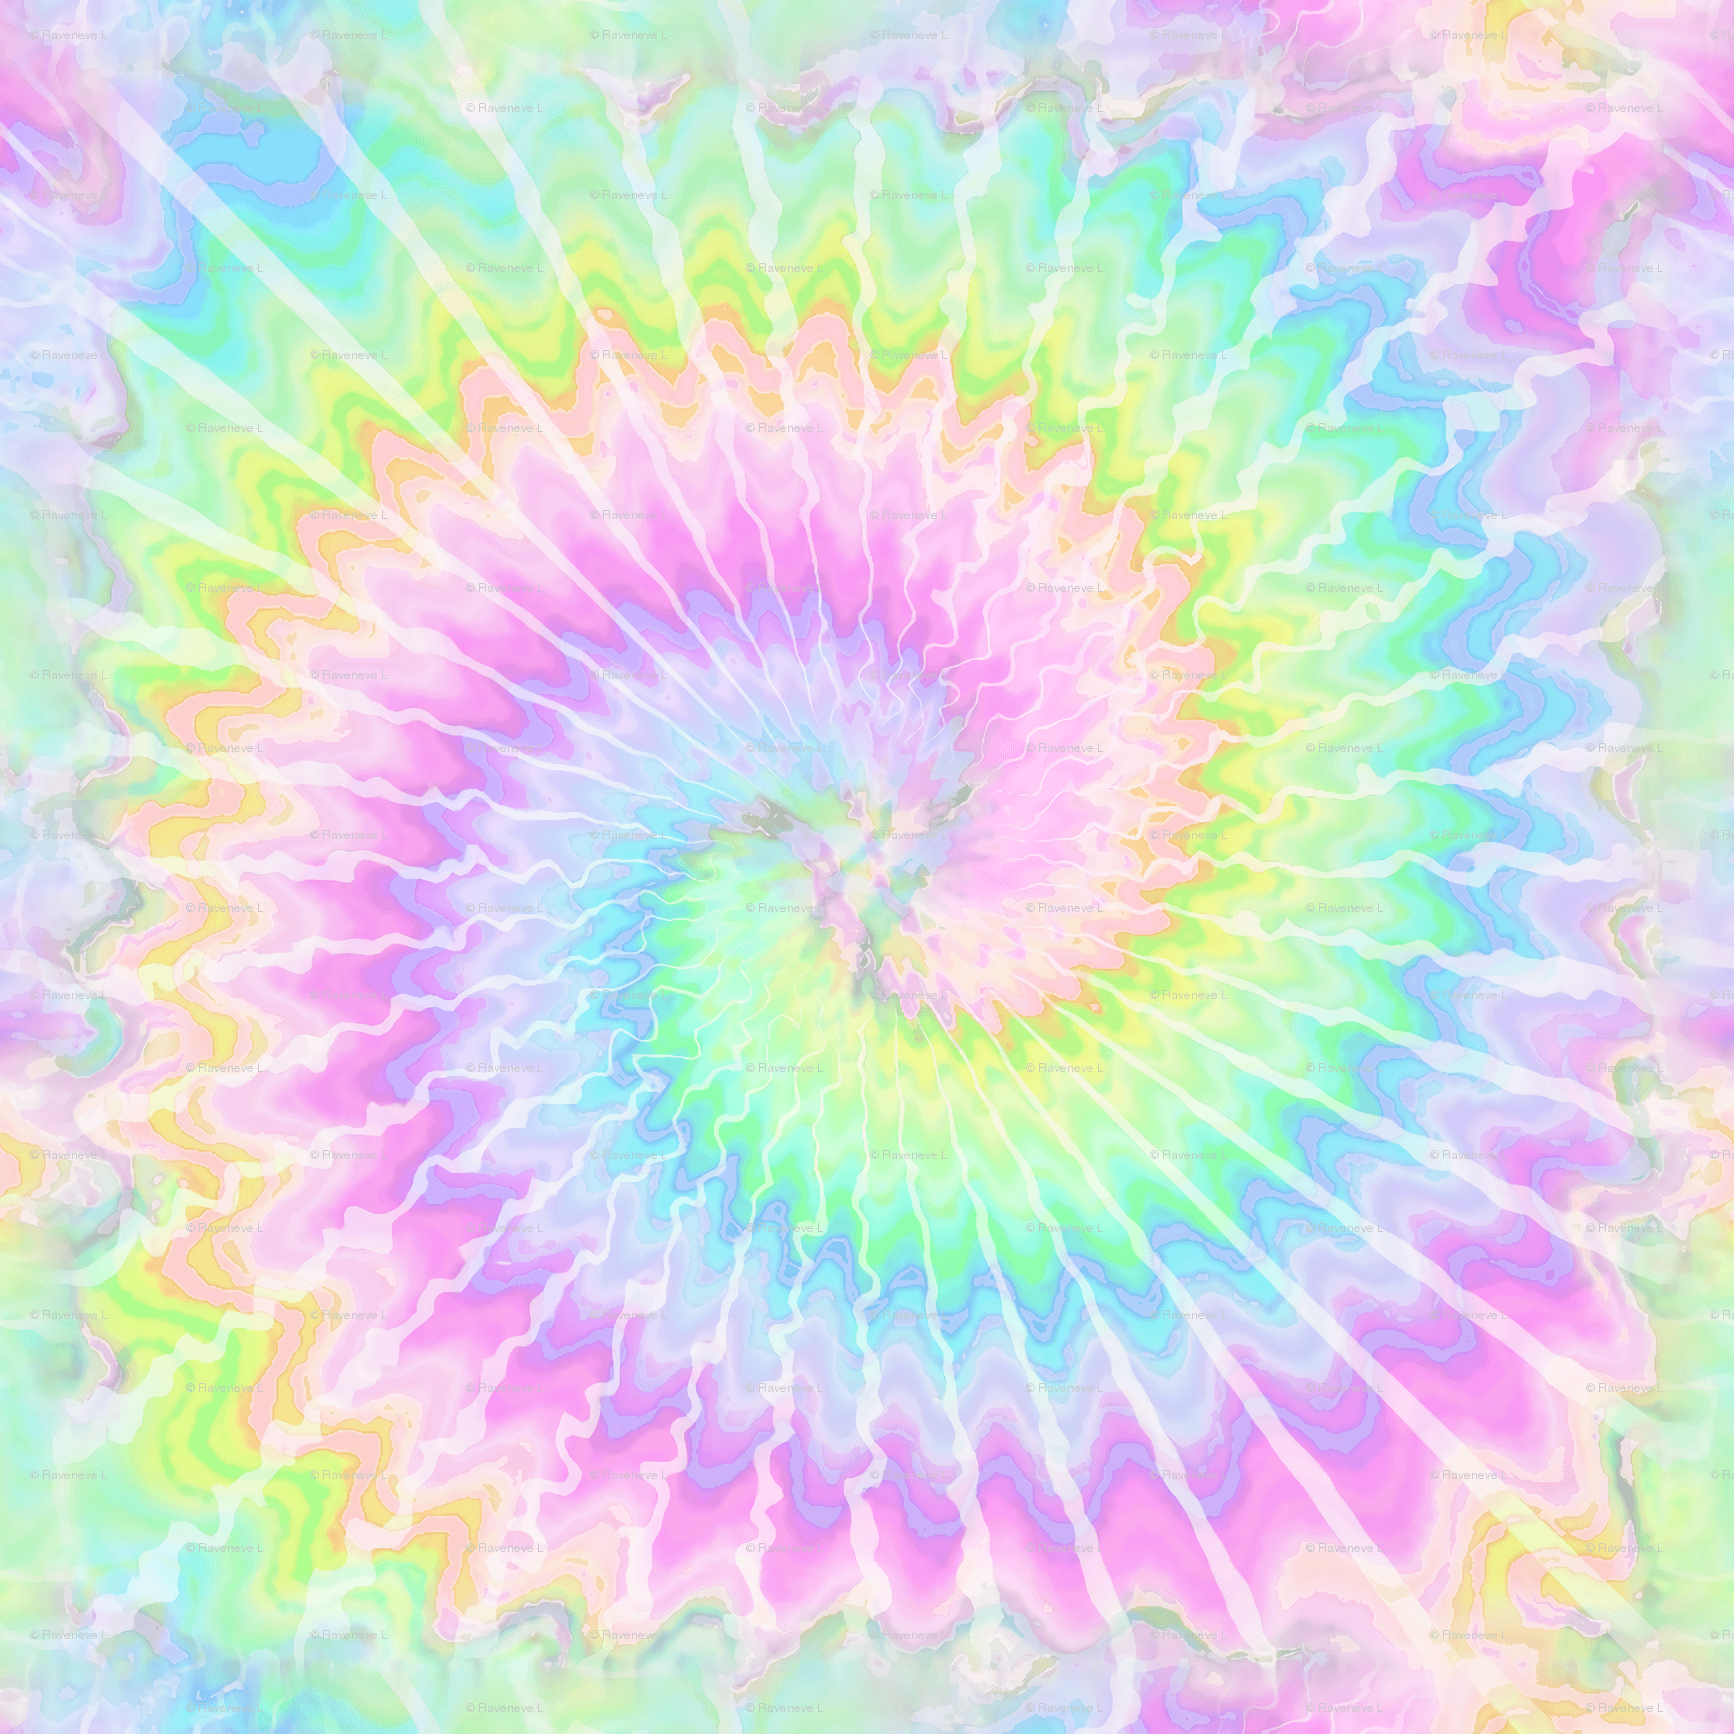 A psychedelic spiral pattern in bright colors - Pastel rainbow